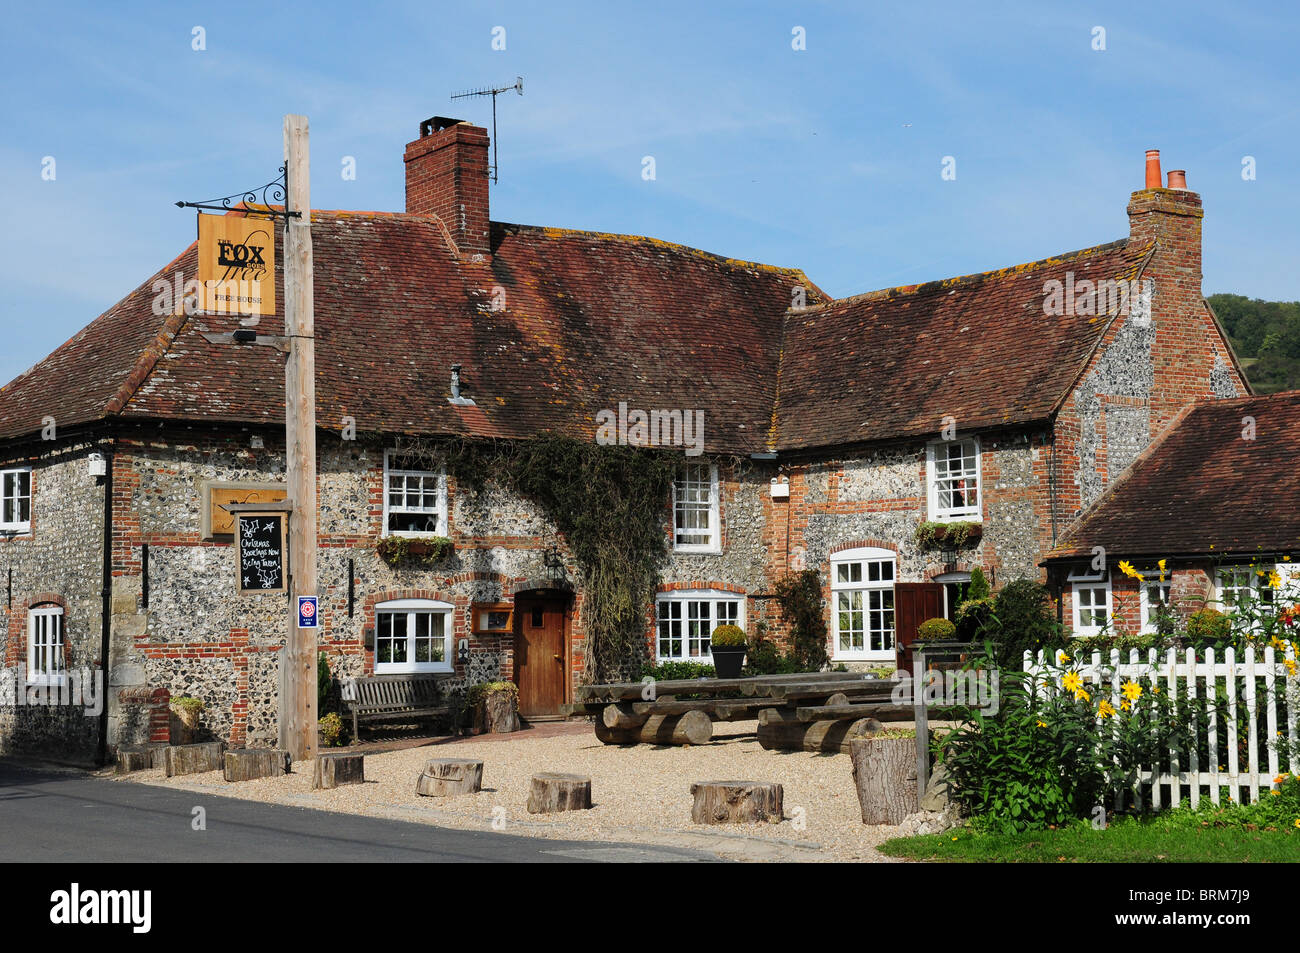 The Inn and public house, 'The Fox Goes Free'. Stock Photo